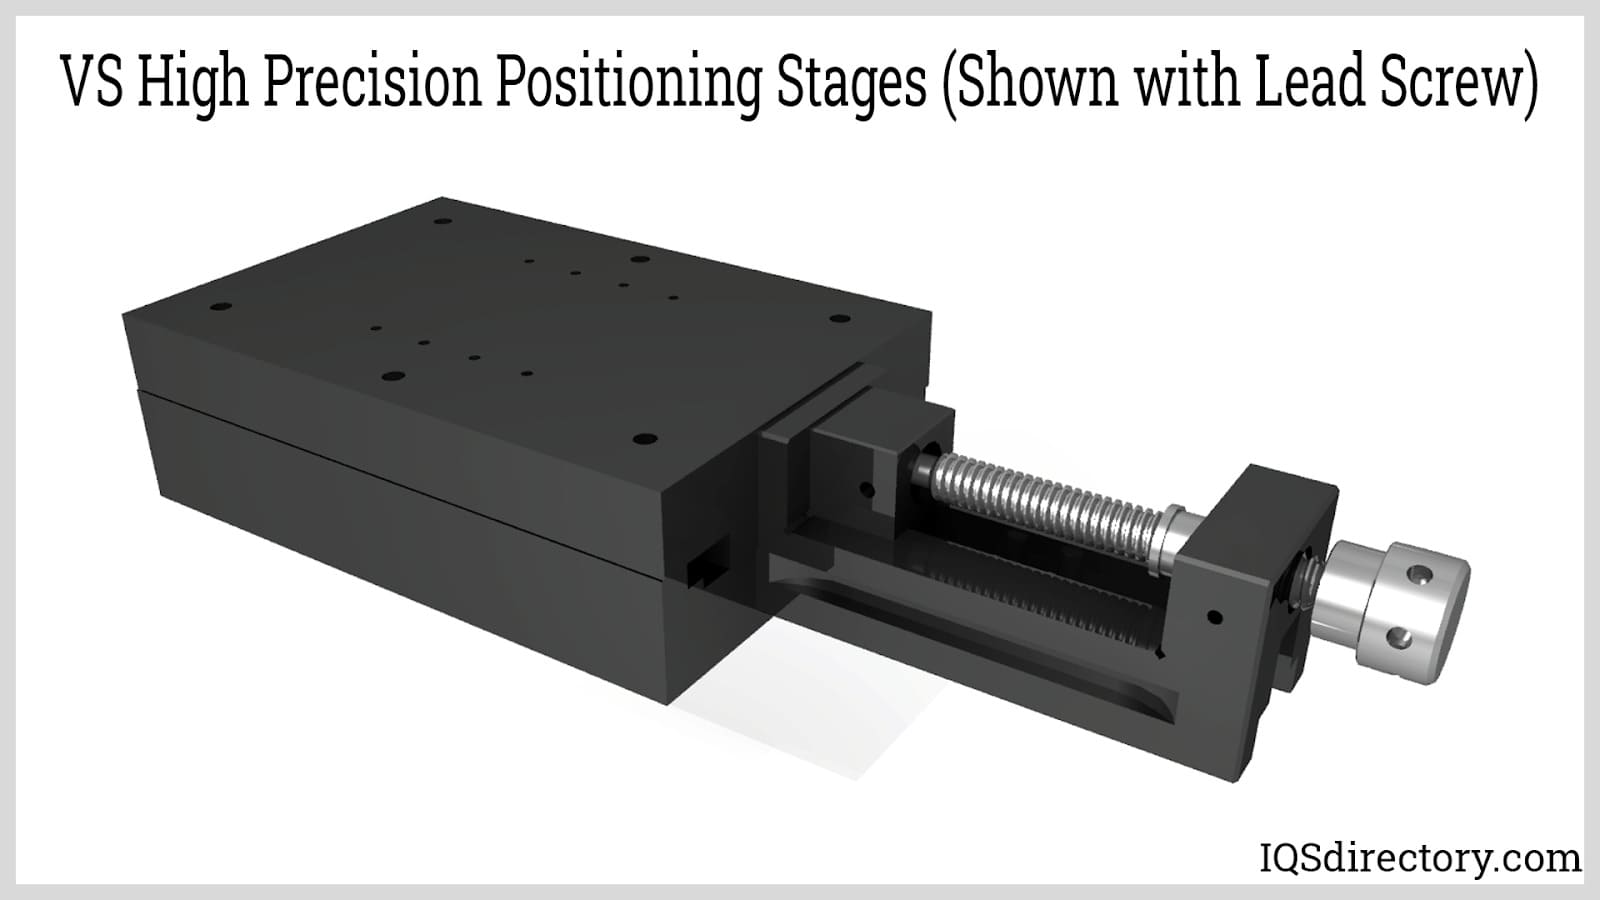 VS High Precision Positioning Stages